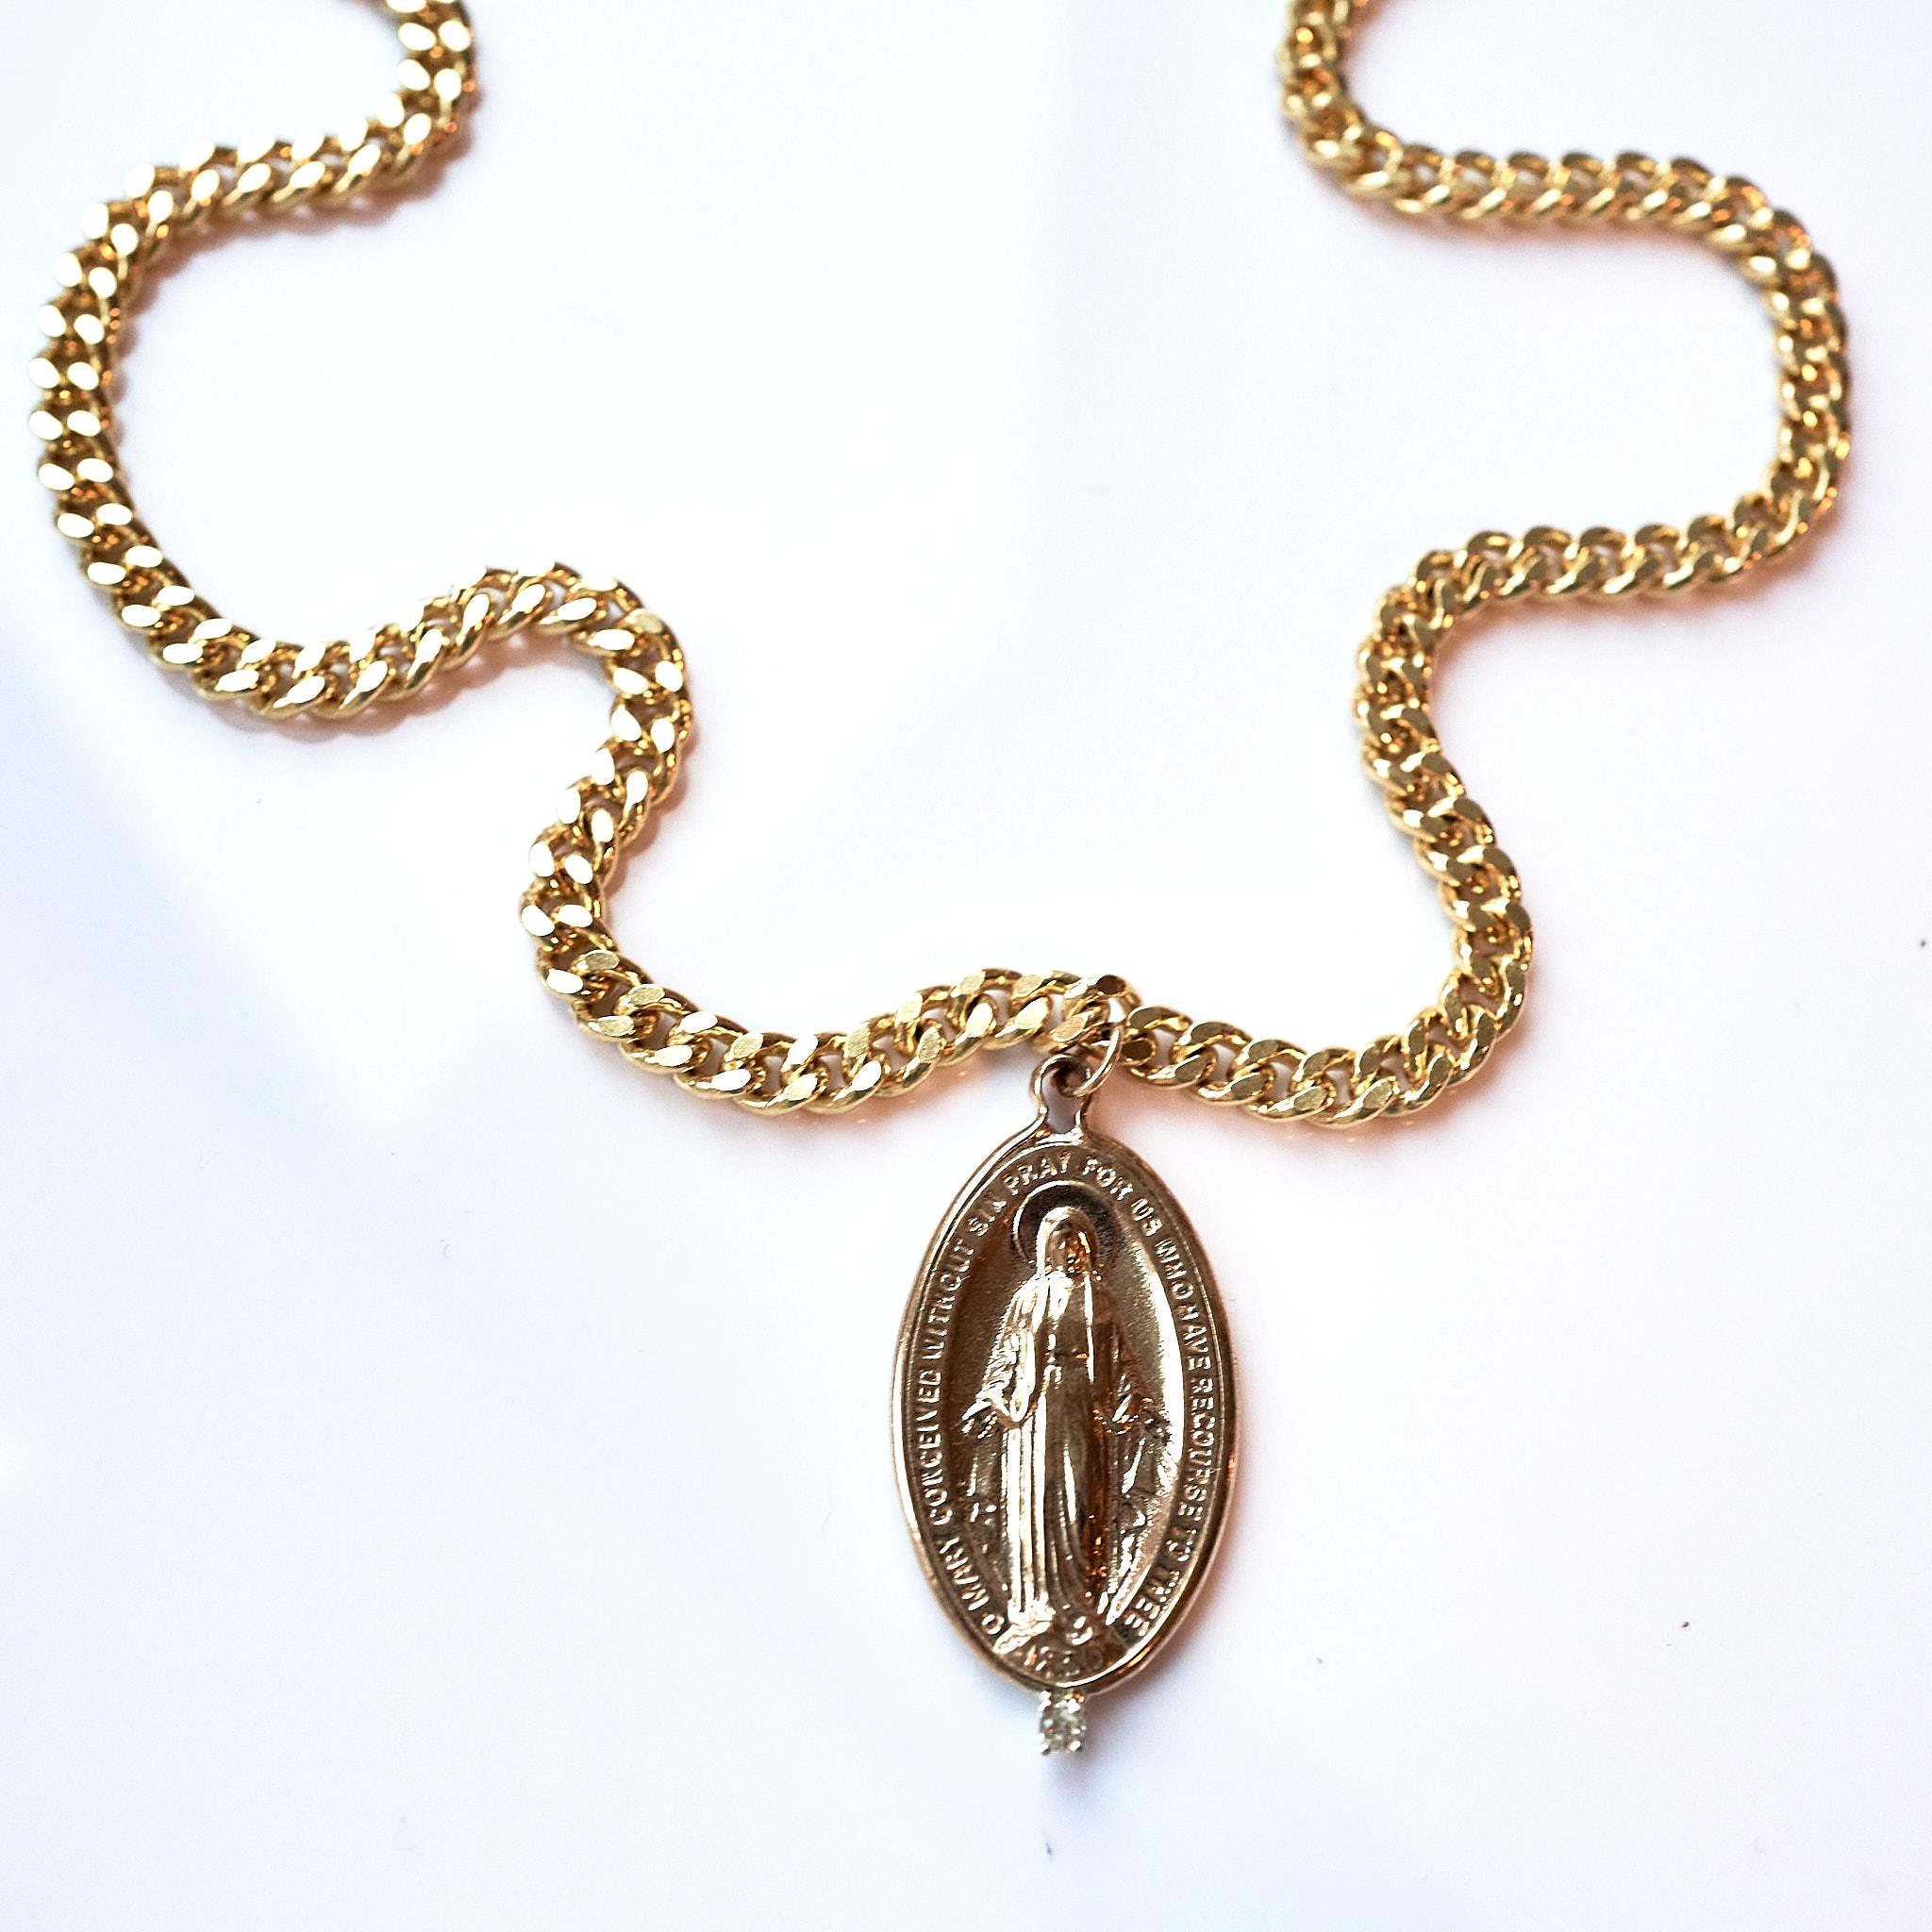 White Medal Virgin Mary Oval Medal Chain Necklace J Dauphin For Sale 1